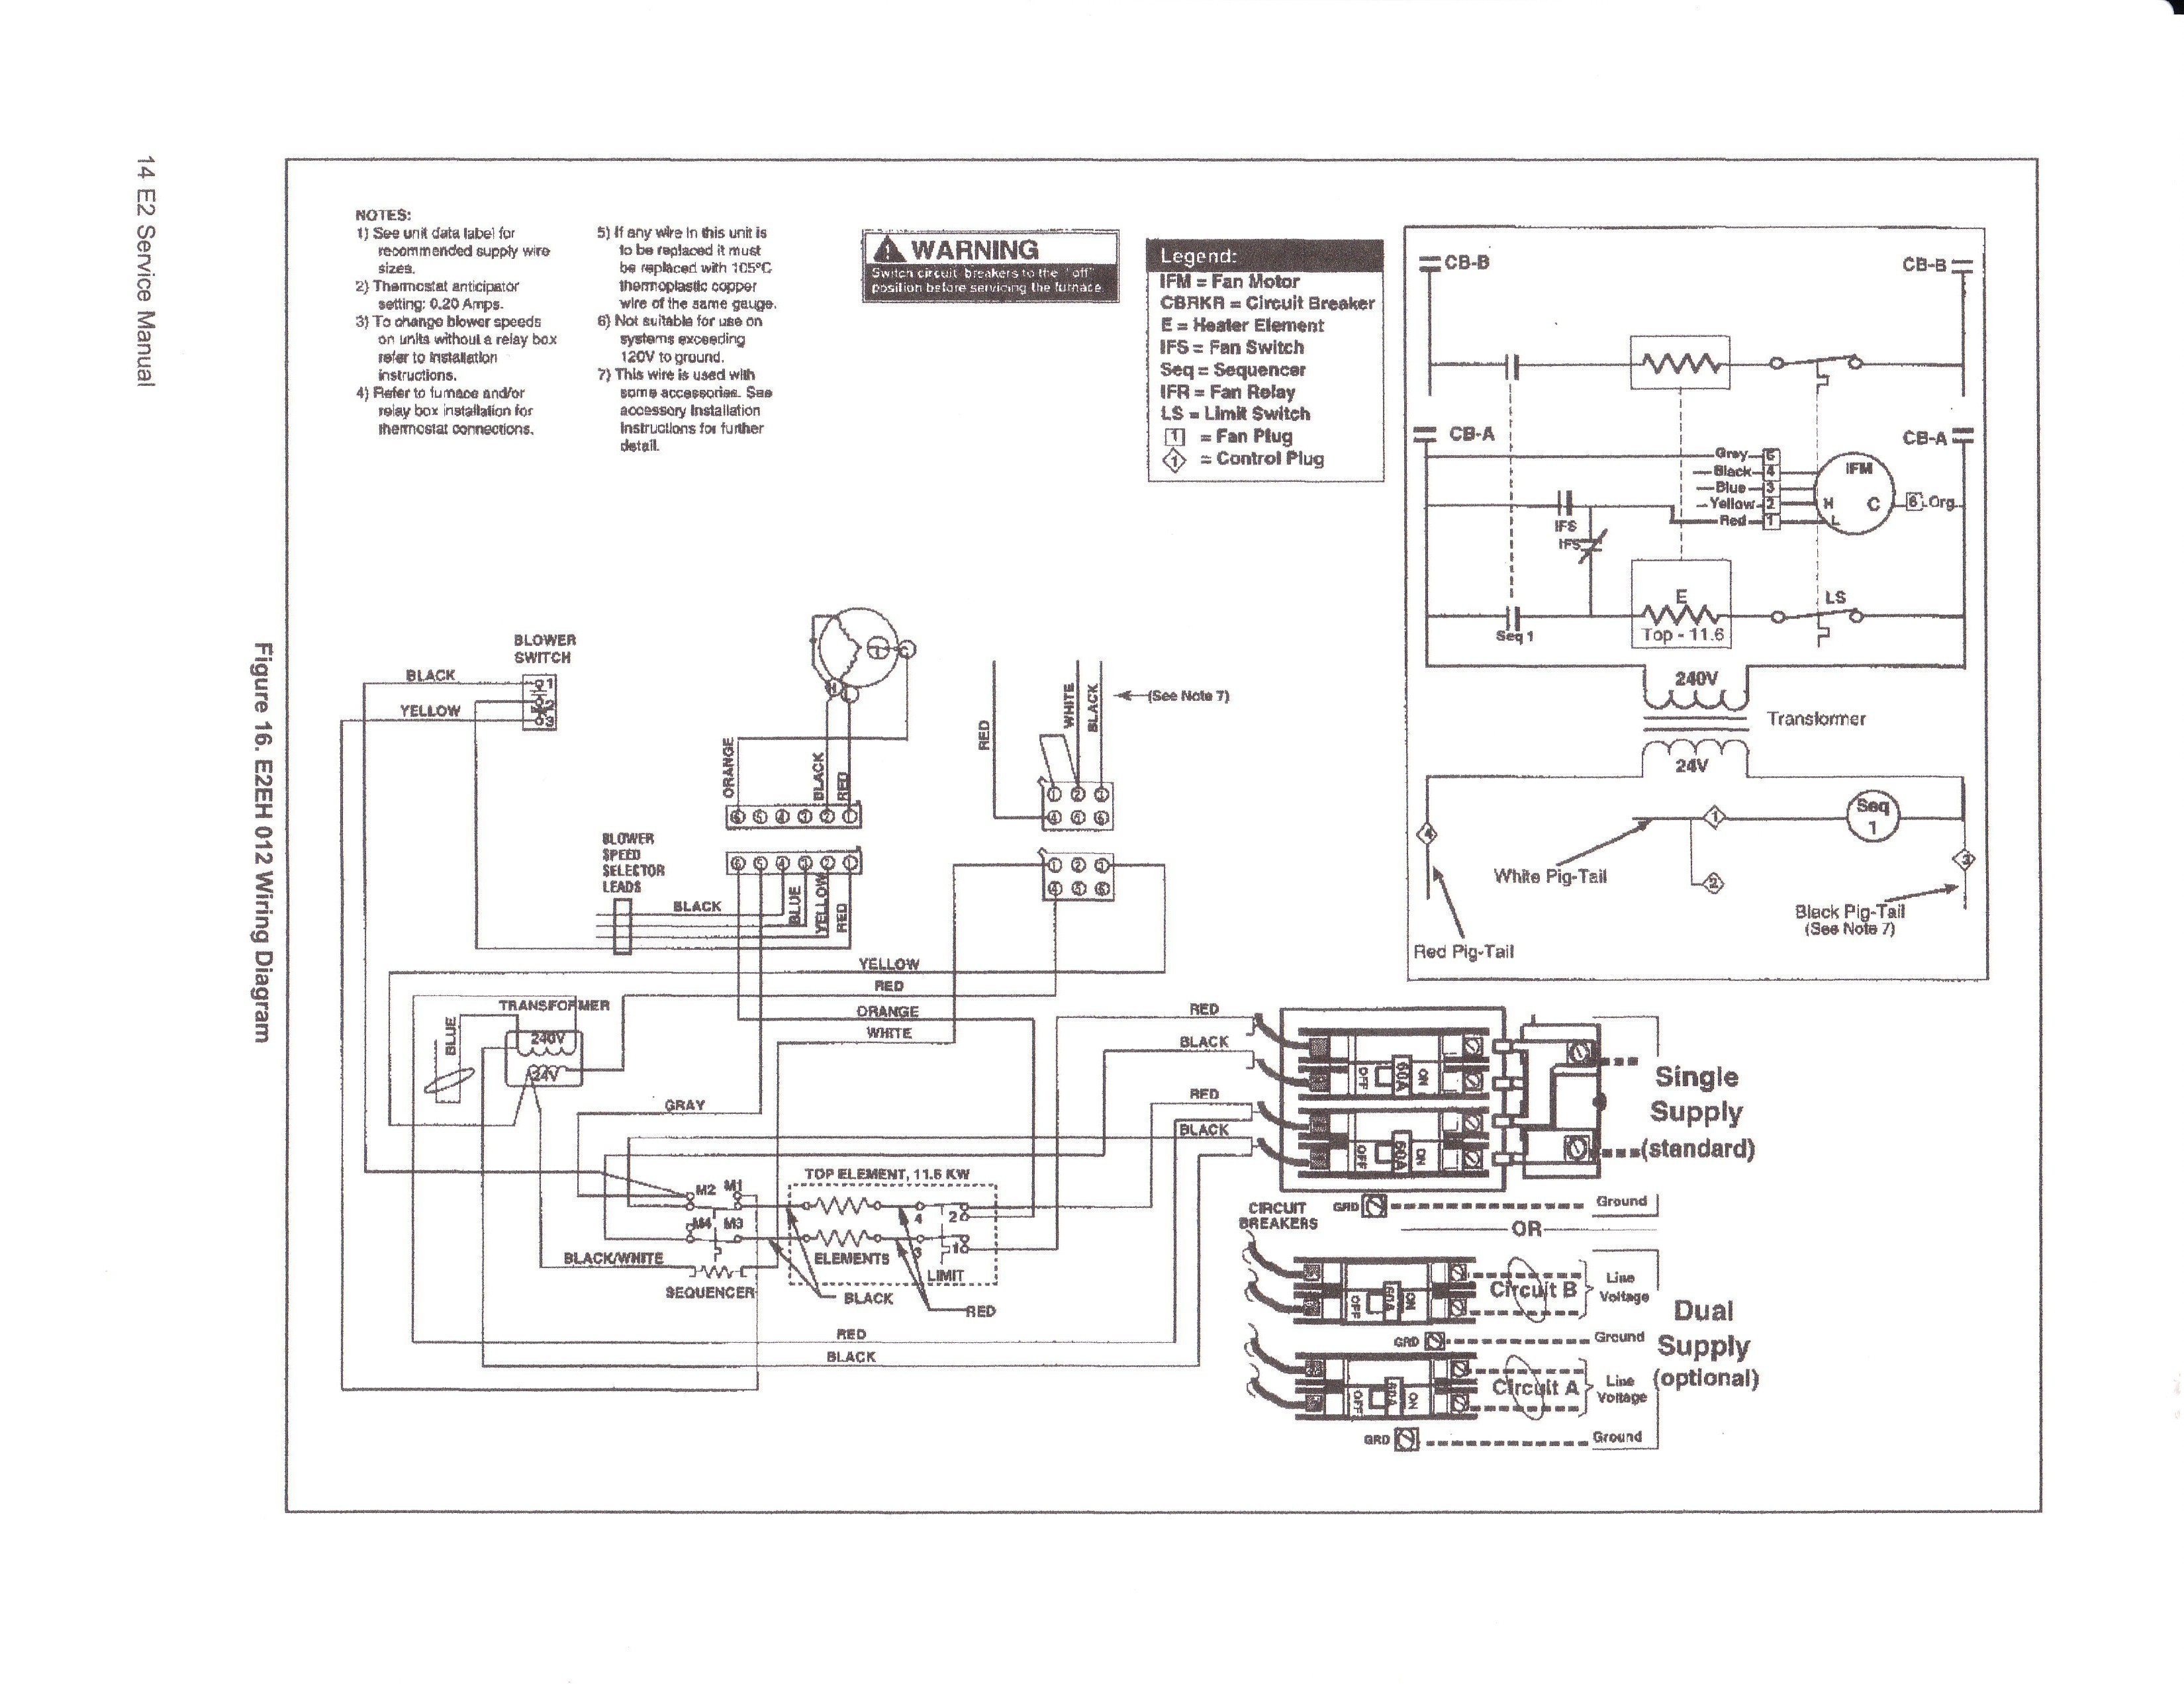 Electric Furnace Wiring Diagram Sequencer Rate Wiring Diagram For Coleman Mobile Home Furnace Fresh Wiring Diagram